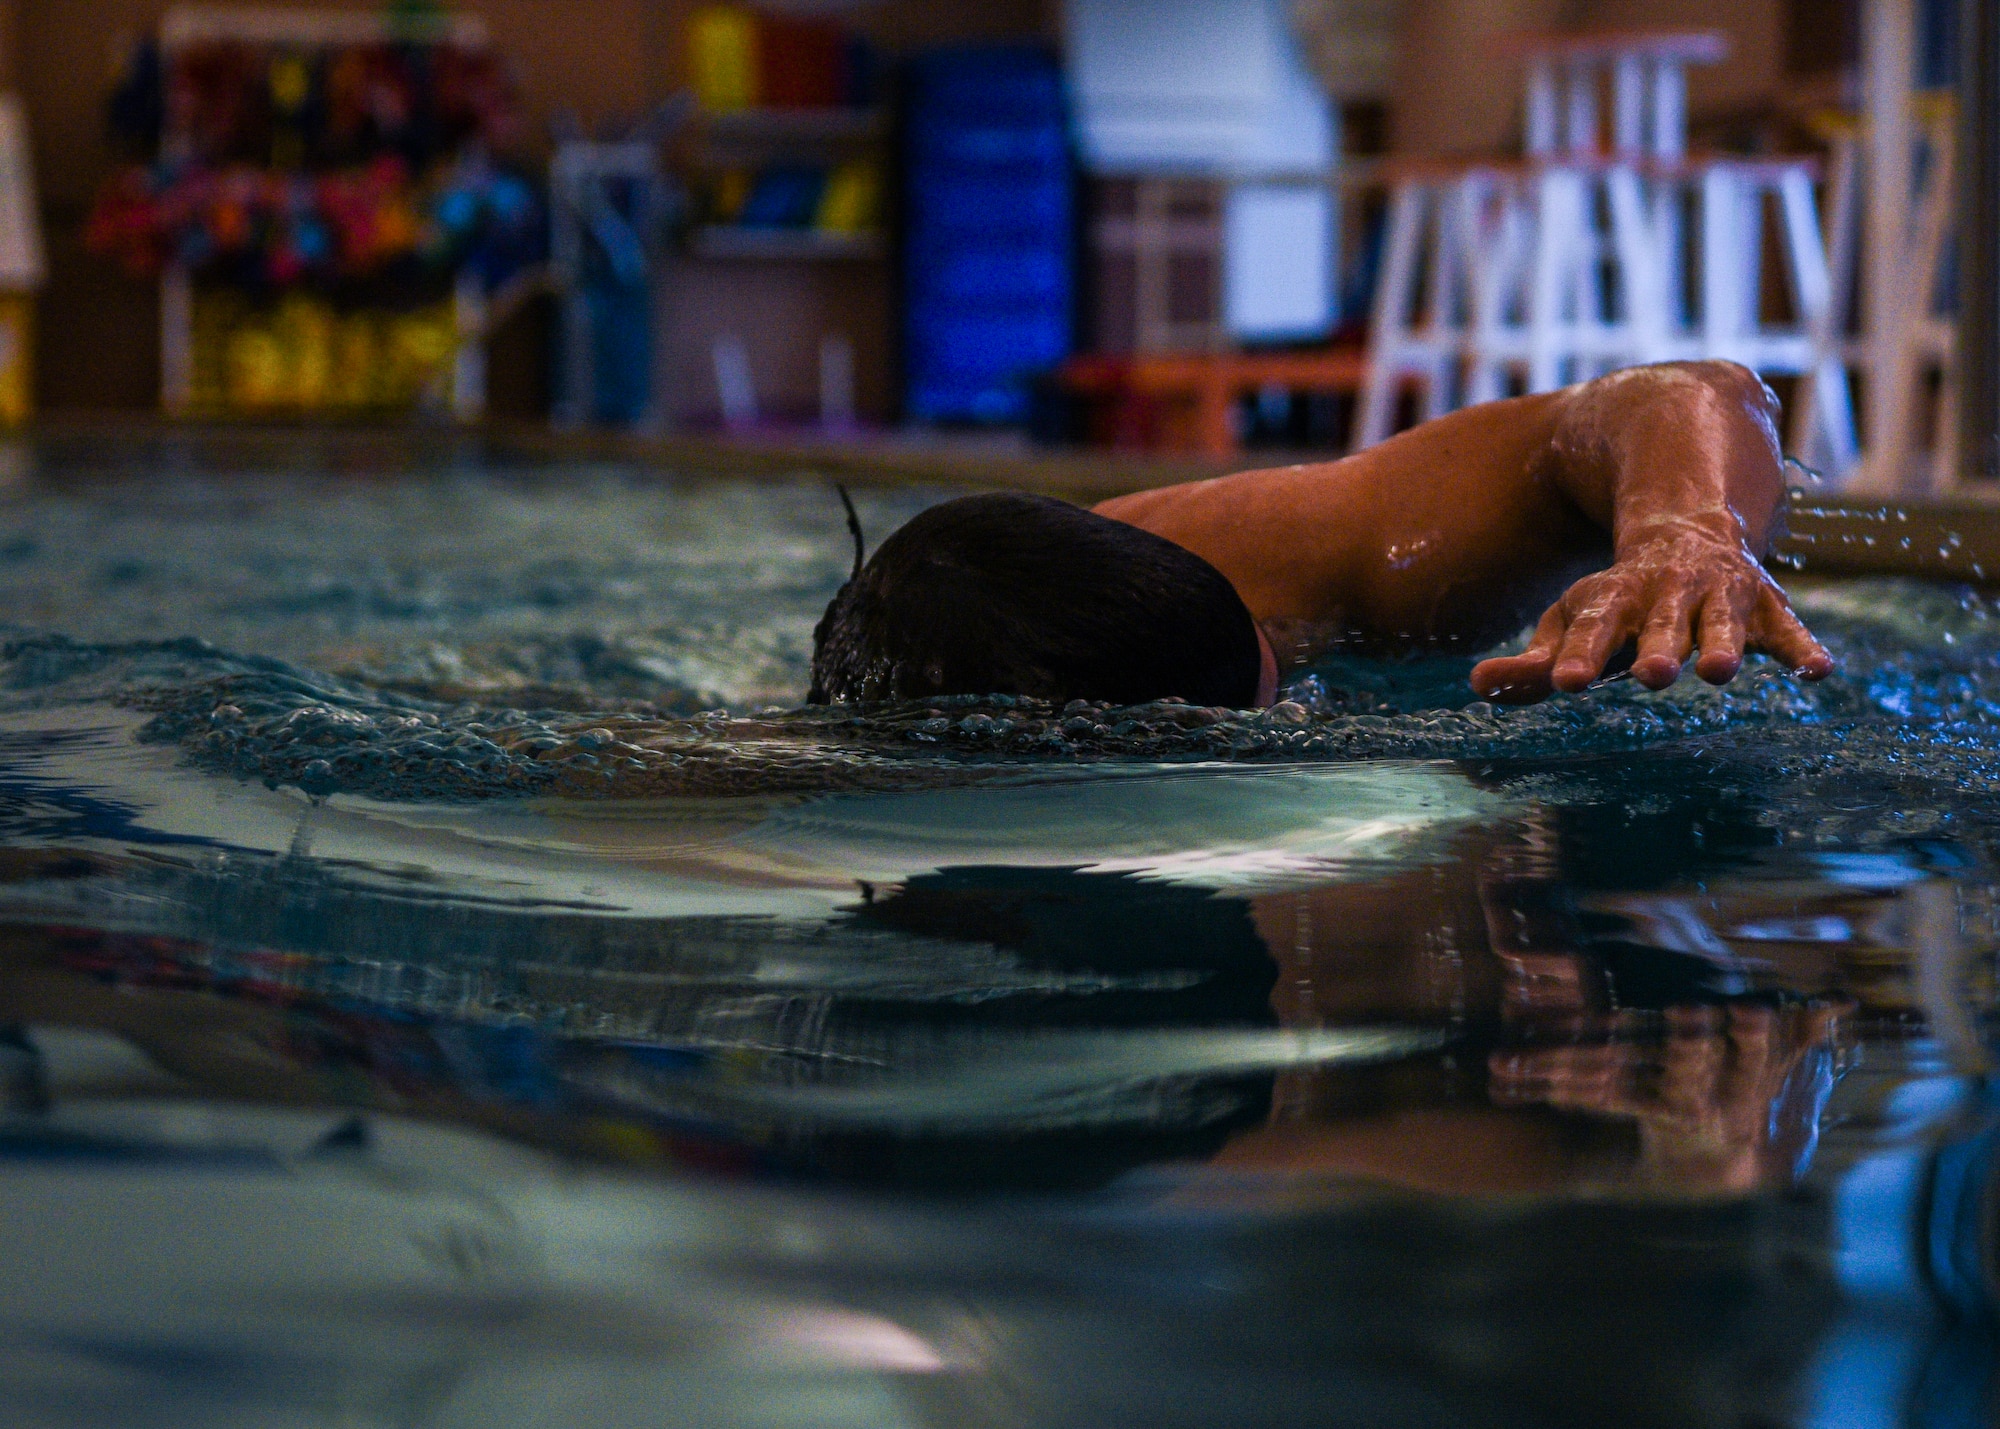 Major Richard Bottinelli, 90th Force Support Squadron operations officer, swims at the Aquatic Center pool at F.E. Warren Air Force Base, Wyo., July 17, 2019. Bottinelli trained for months to compete in a bodybuilding competition in Orlando, Fla. (U.S. Air Force photo by Staff Sgt. Ashley N. Sokolov)